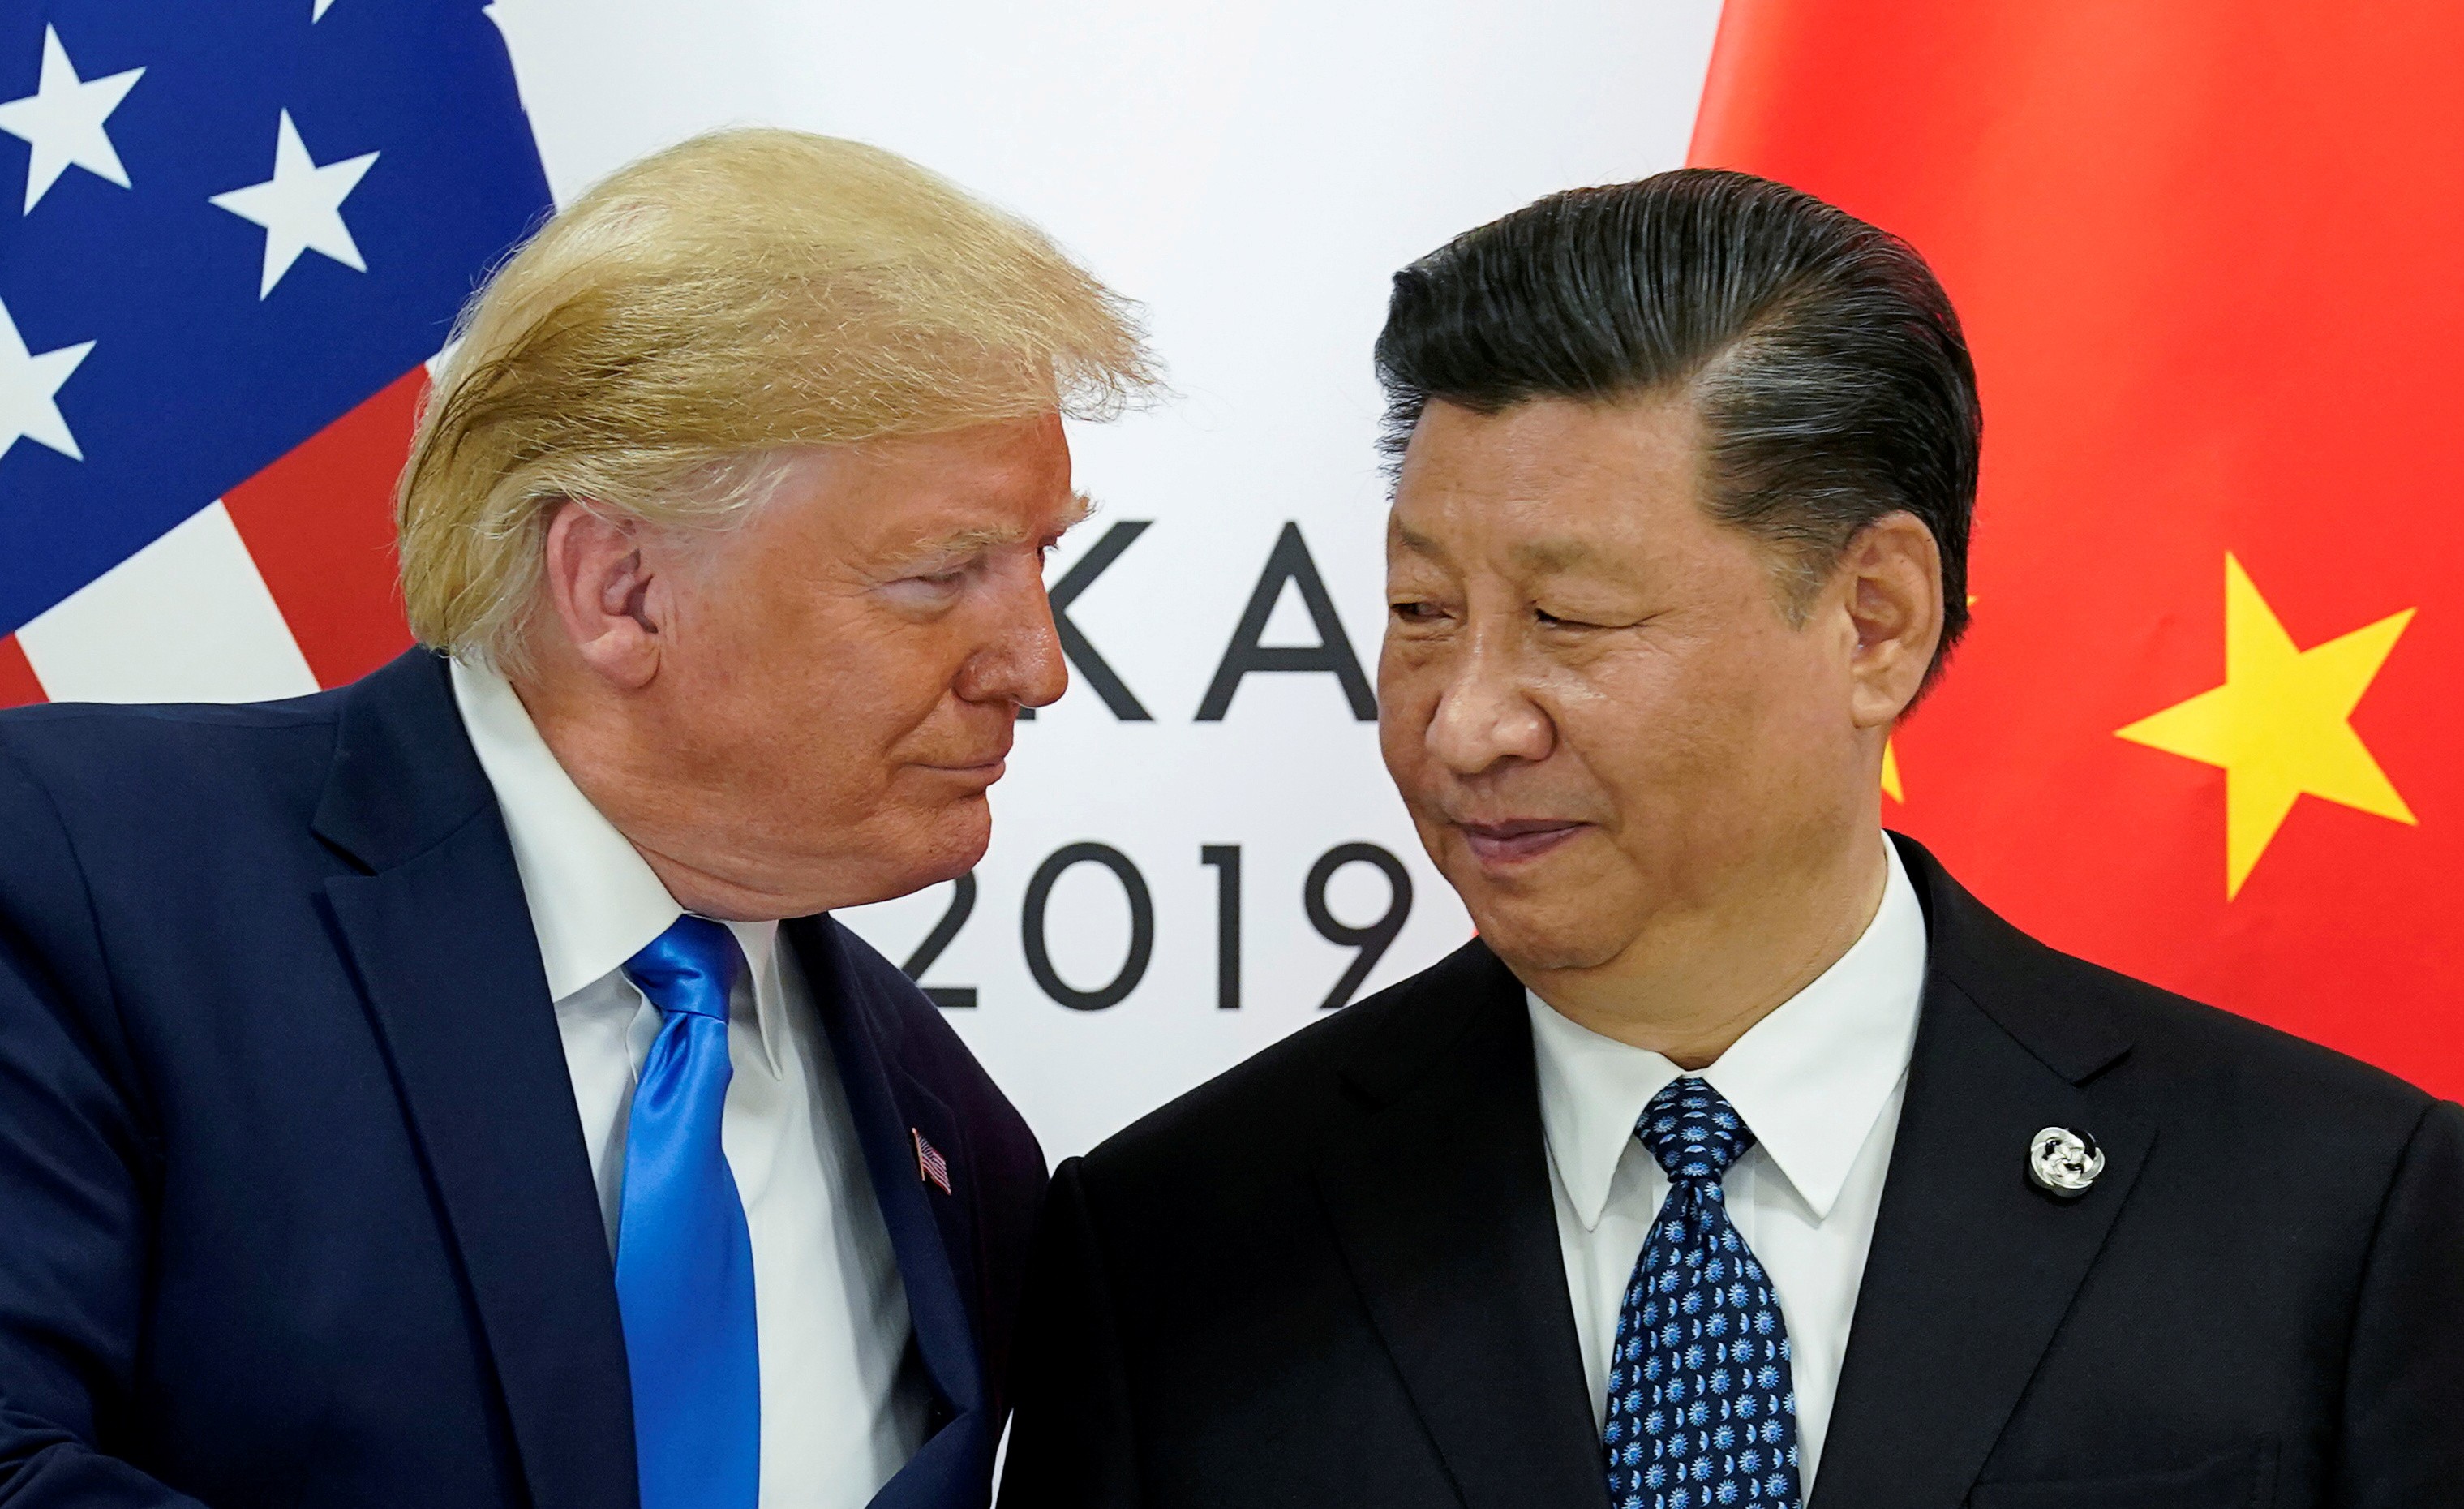 In signing the bills, US President Donald Trump spoke of his respect for Chinese President Xi Jinping as well as the people in Hong Kong. Photo: Reuters